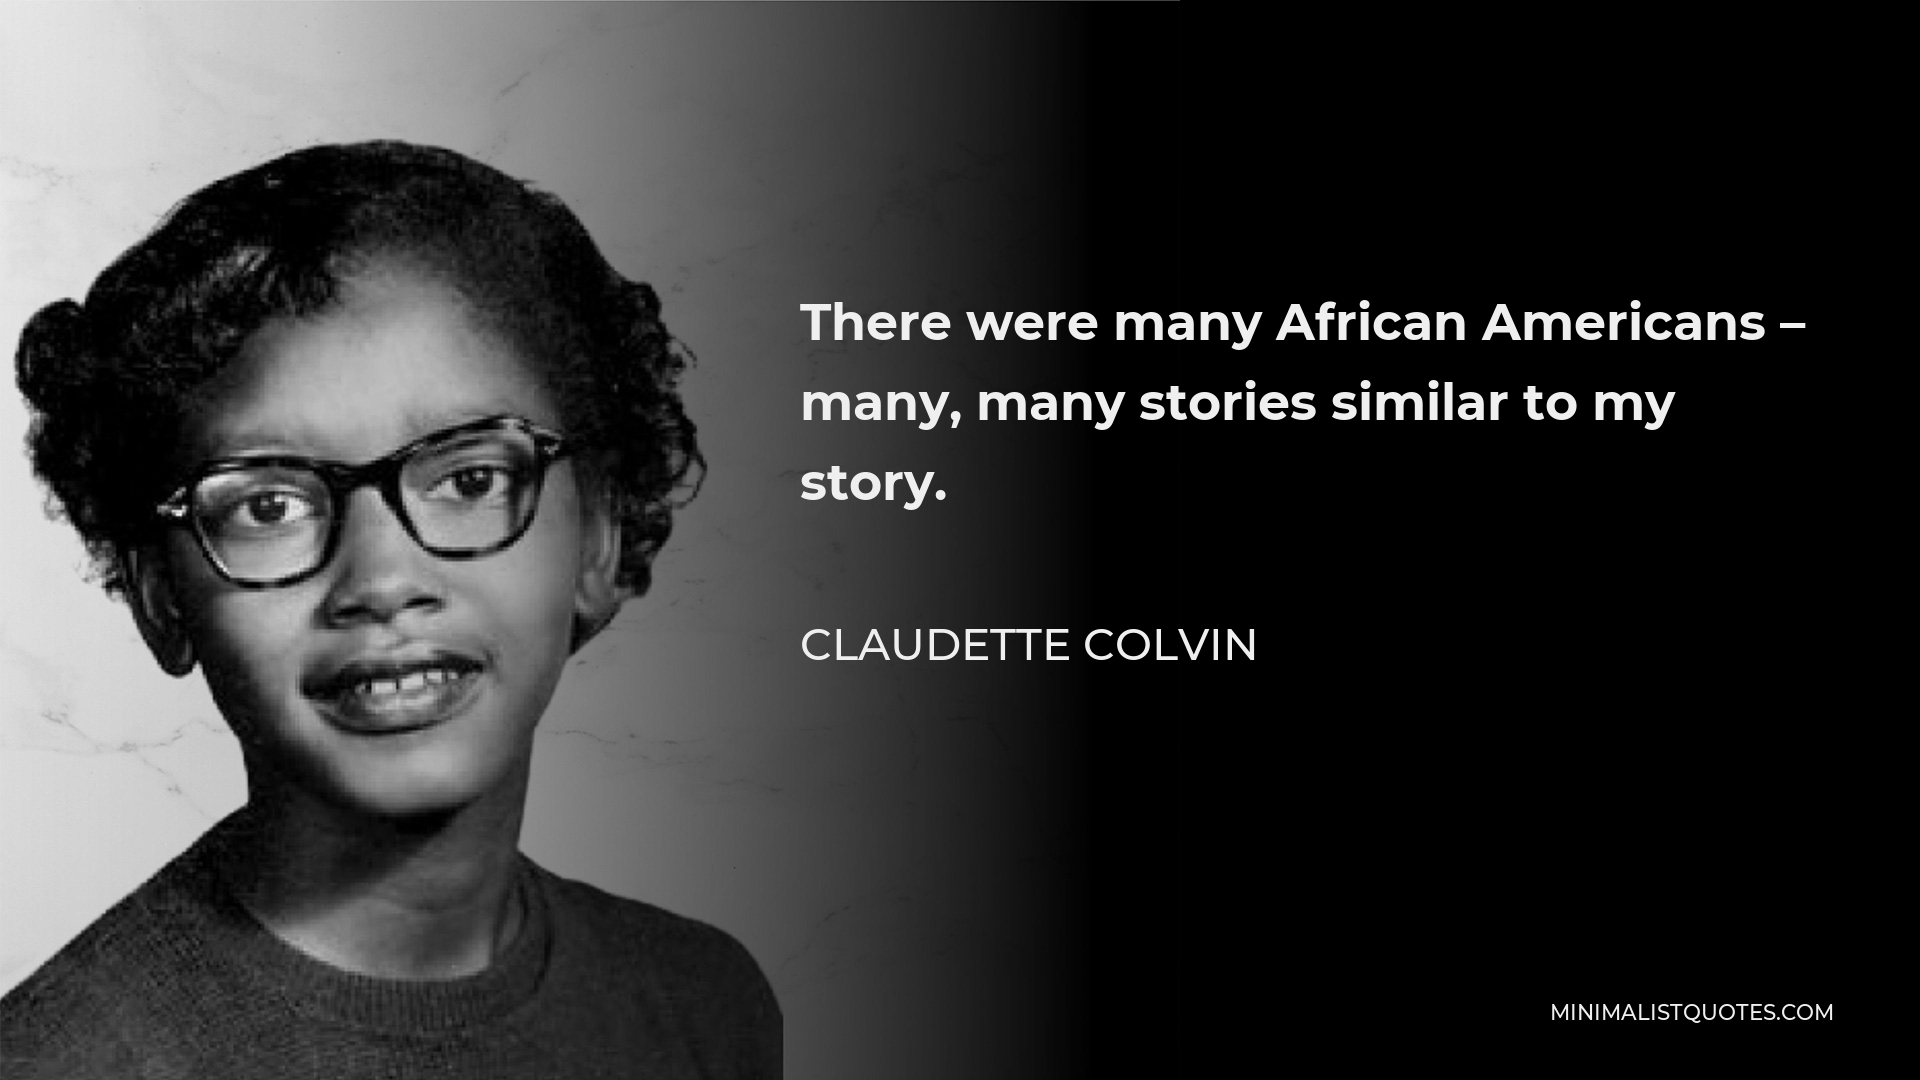 Claudette Colvin Quote - There were many African Americans – many, many stories similar to my story.